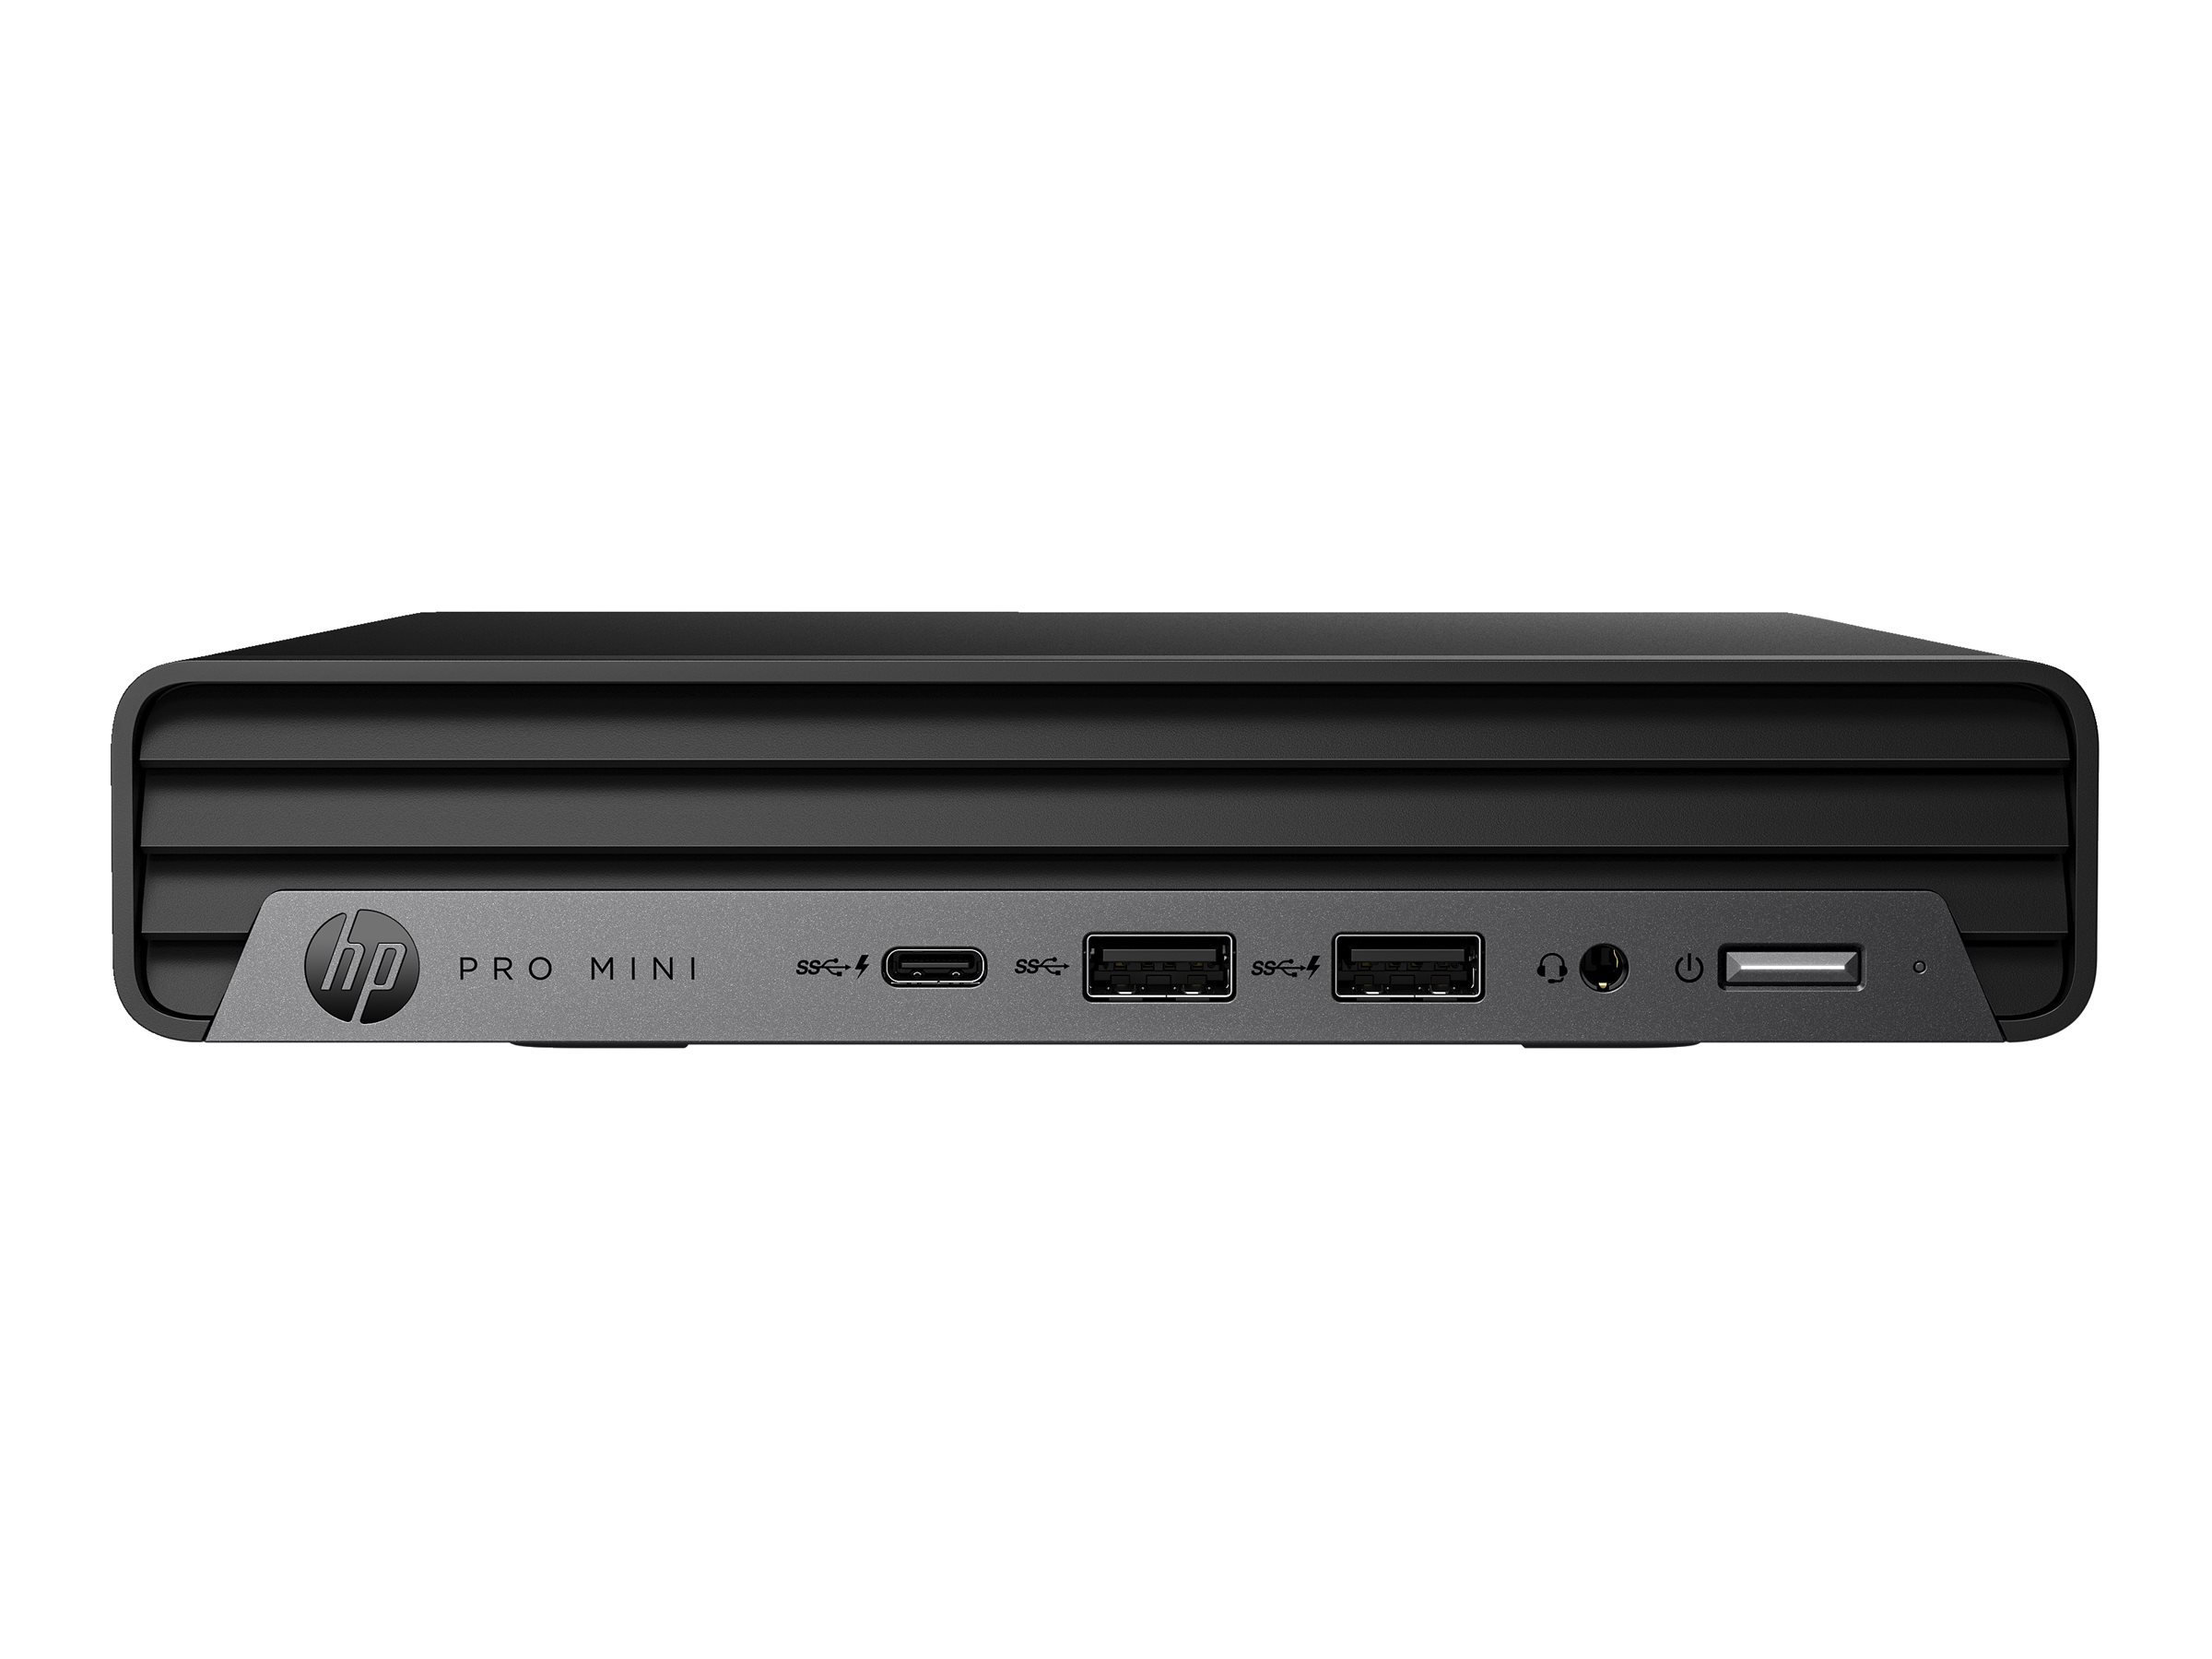 HP Pro 400 G9 - Wolf Pro Security - Mini - Core i5 12500T / 2 GHz - RAM 8 GB - SSD 256 GB - NVMe, HP Value - UHD Graphics 770 - 1GbE, Bluetooth 5.2, Wi-Fi 6E - WLAN: Bluetooth 5.2, 802.11a/b/g/n/ac/ax (Wi-Fi 6E)